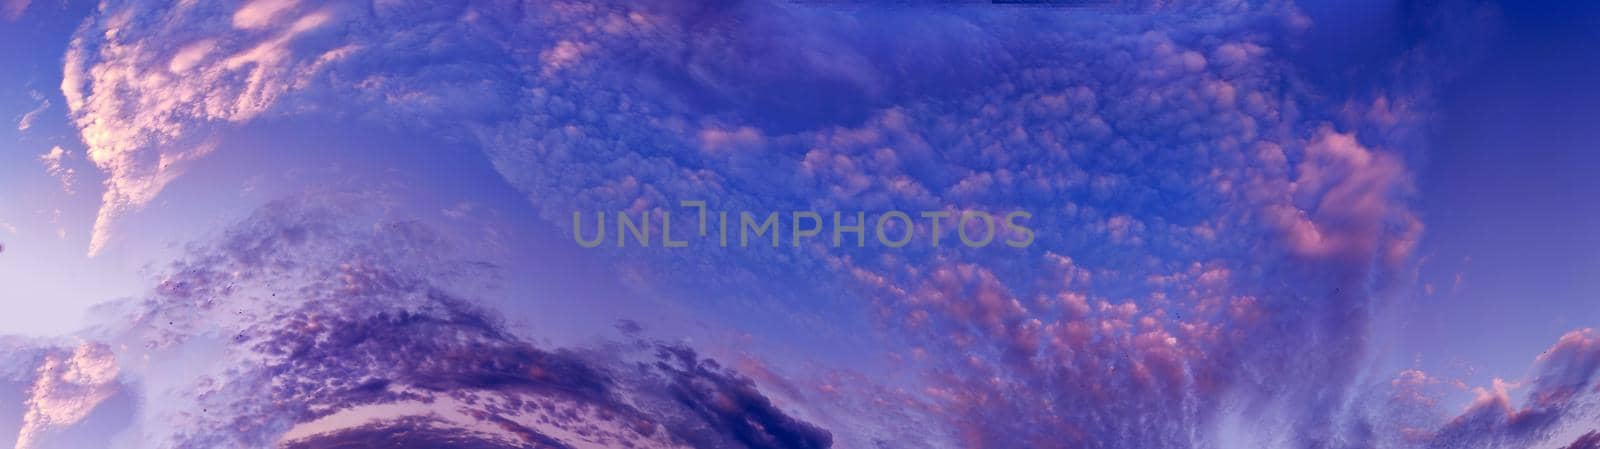 purple sky panorama with clouds for atmospheric background by Annado